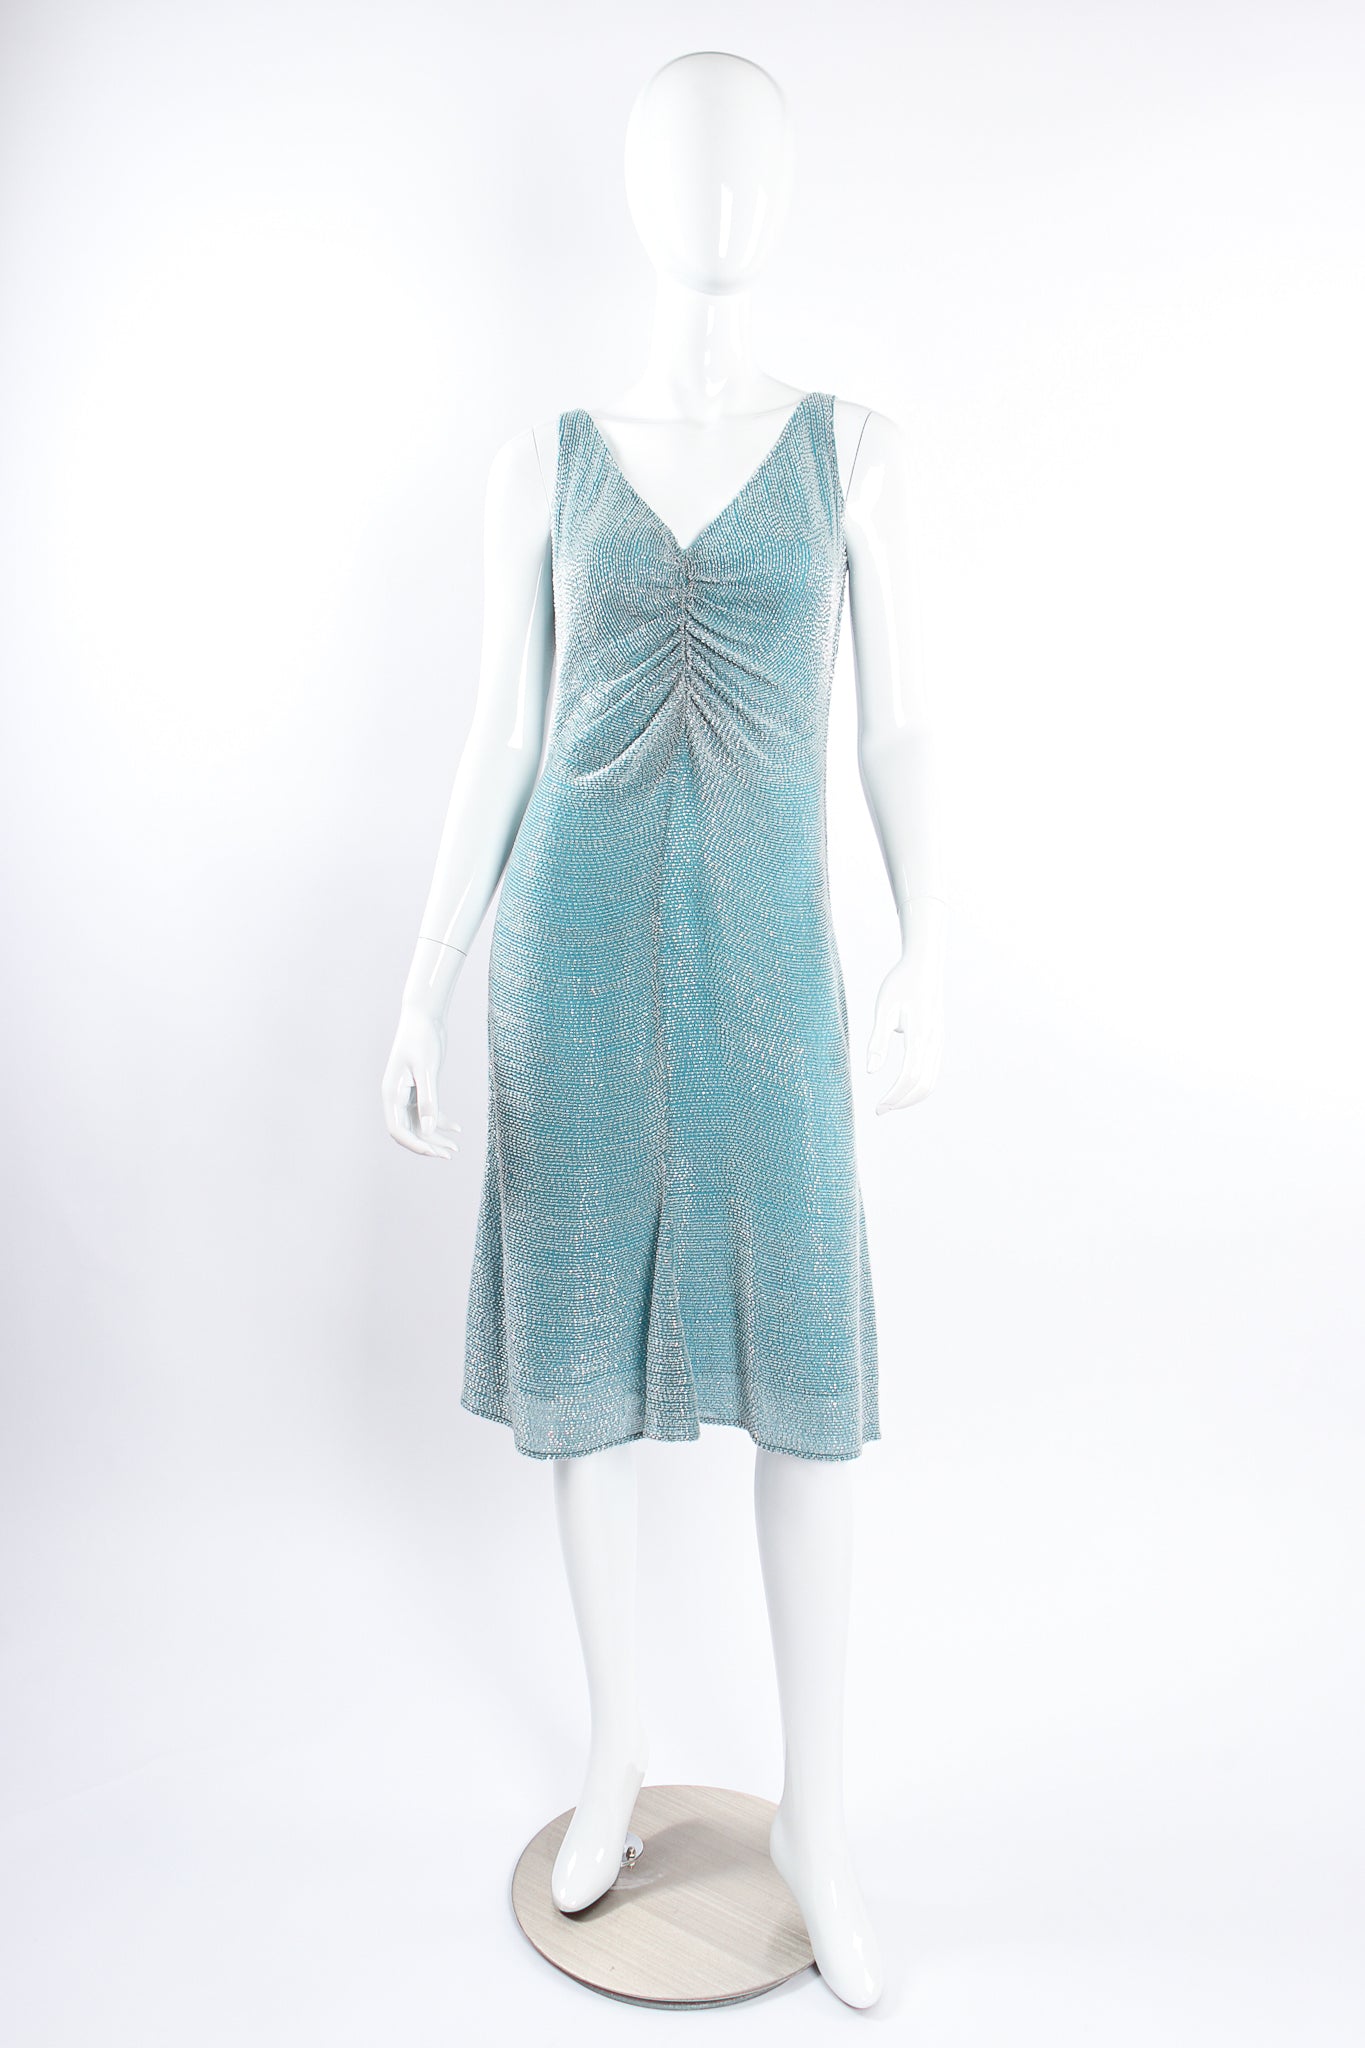 Vintage Badgley Mischka Beaded Ruched Bodice Dress on Mannequin front at Recess Los Angeles